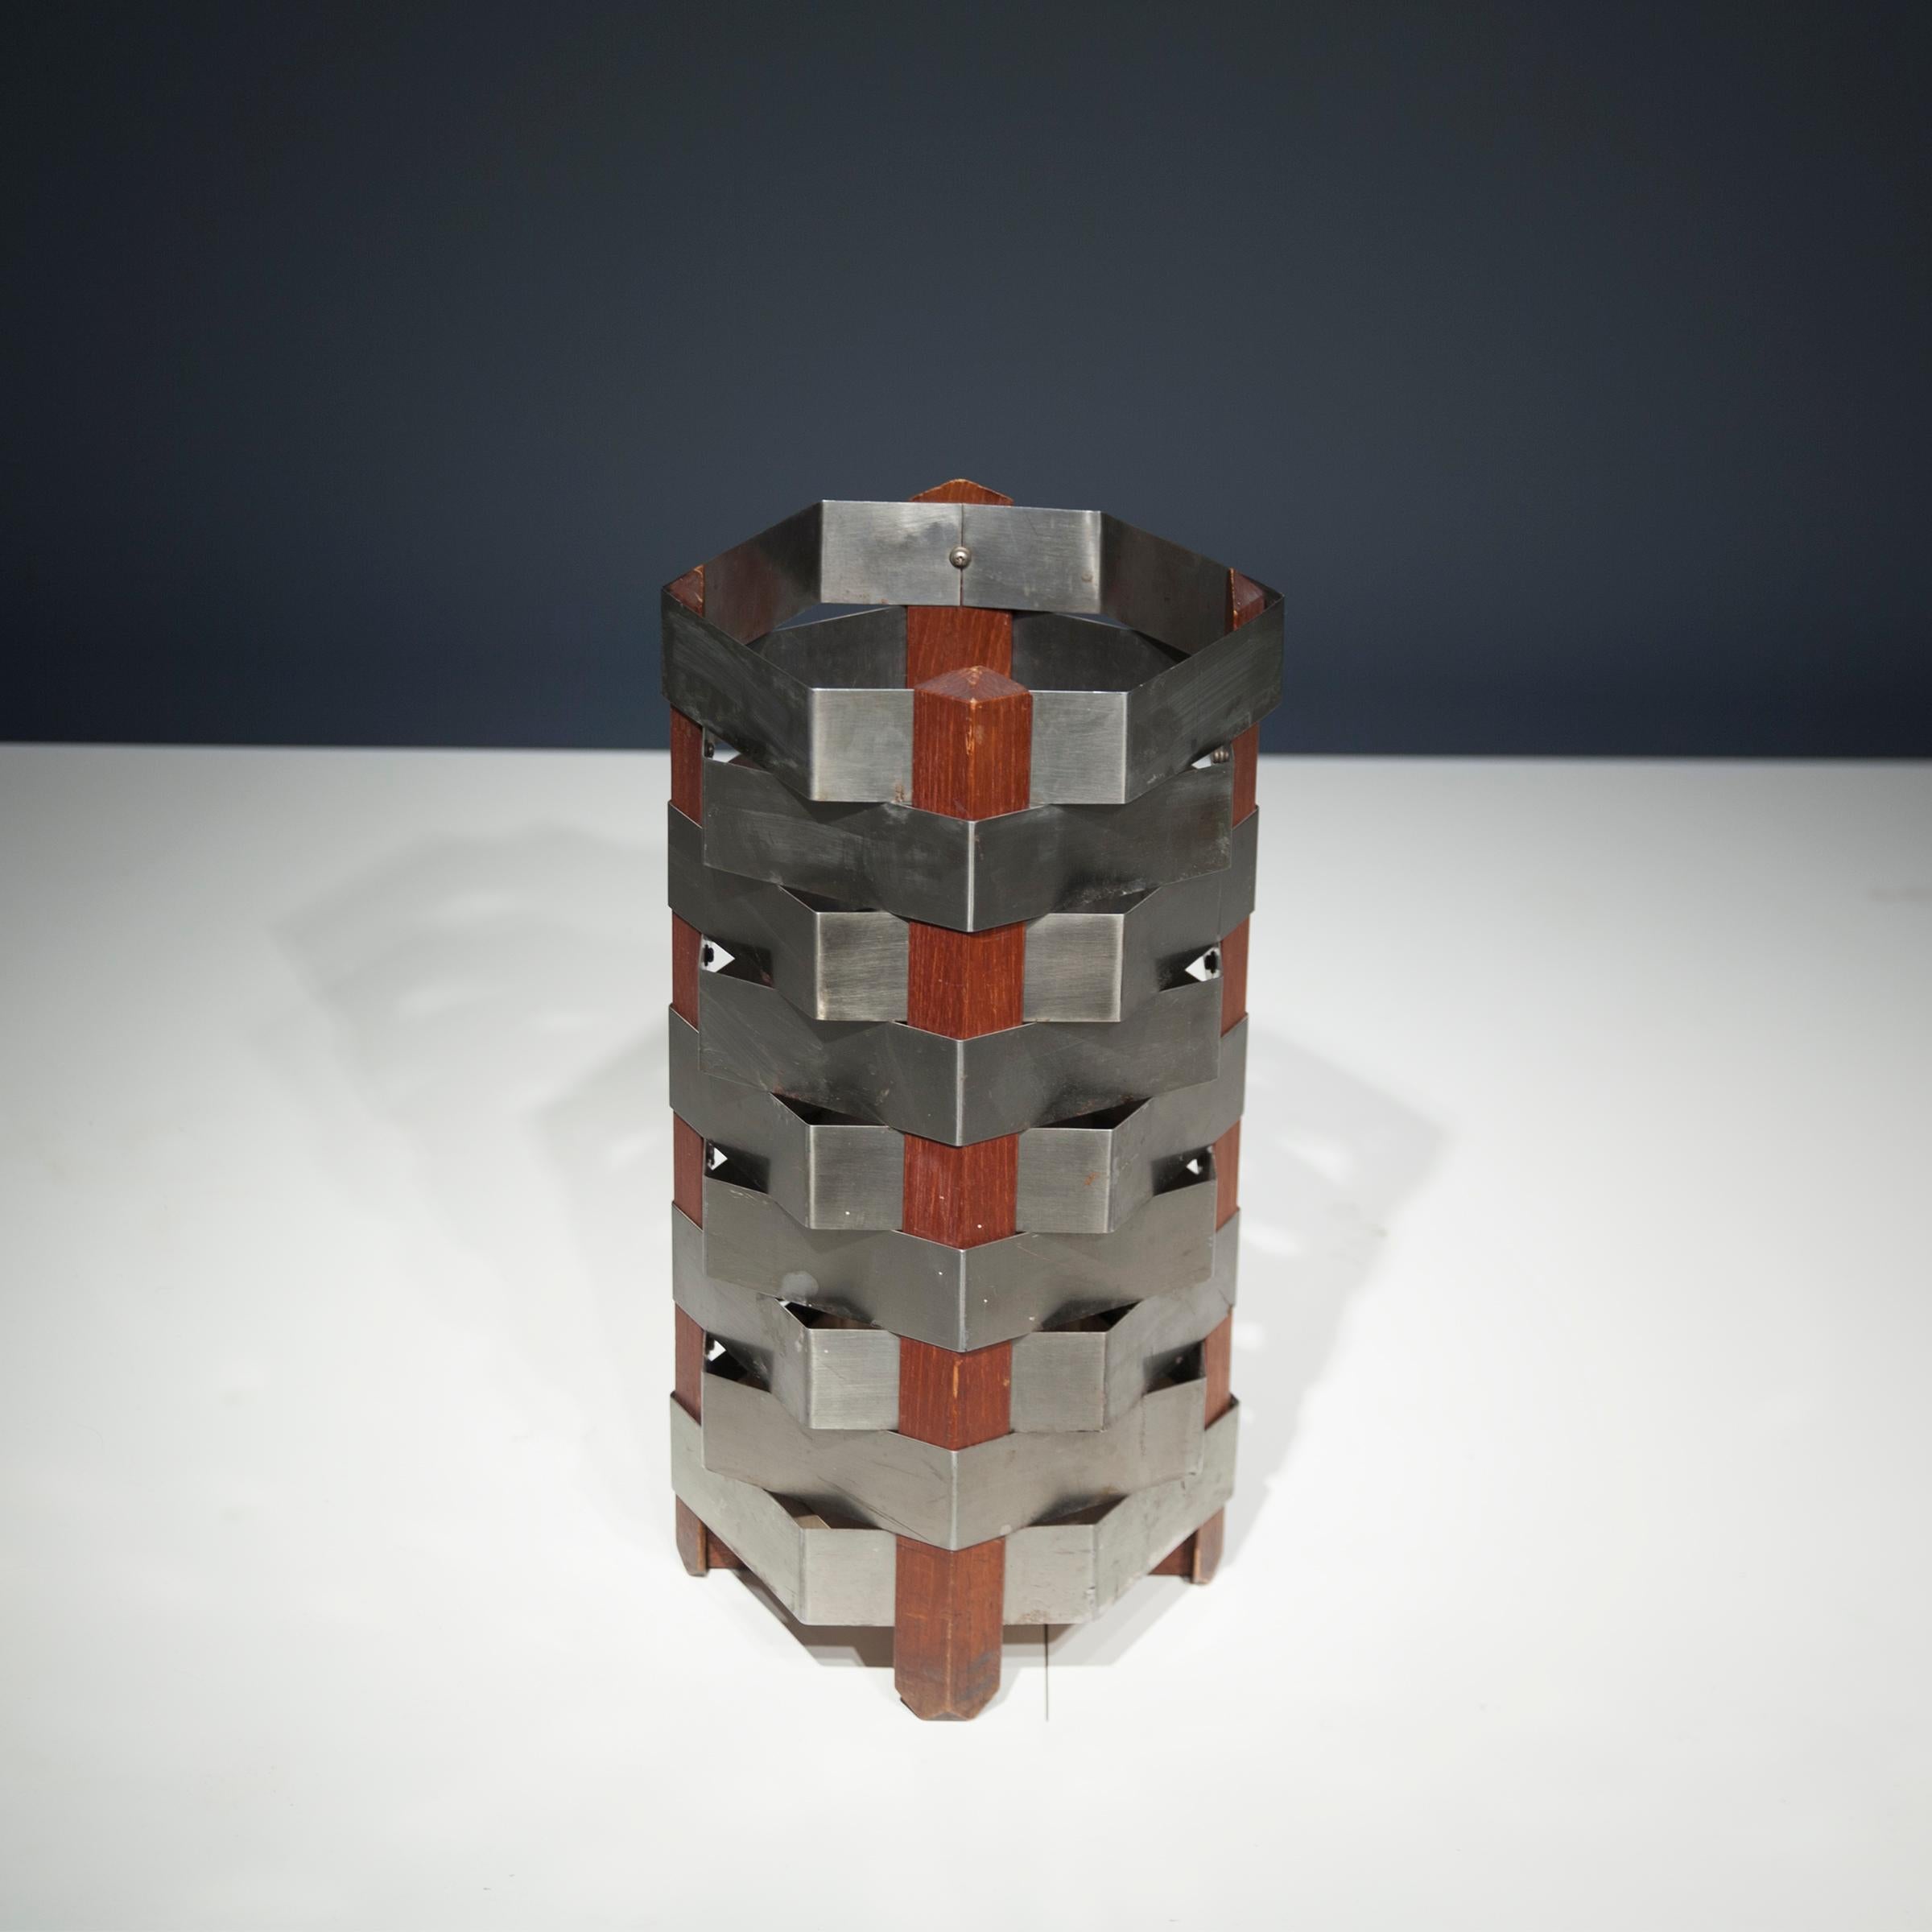 Model no. 1701 umbrella stand by Ico Parisi, Italy, 1959, in teak and stainless steel, manufactured by Stildomus, Rome.